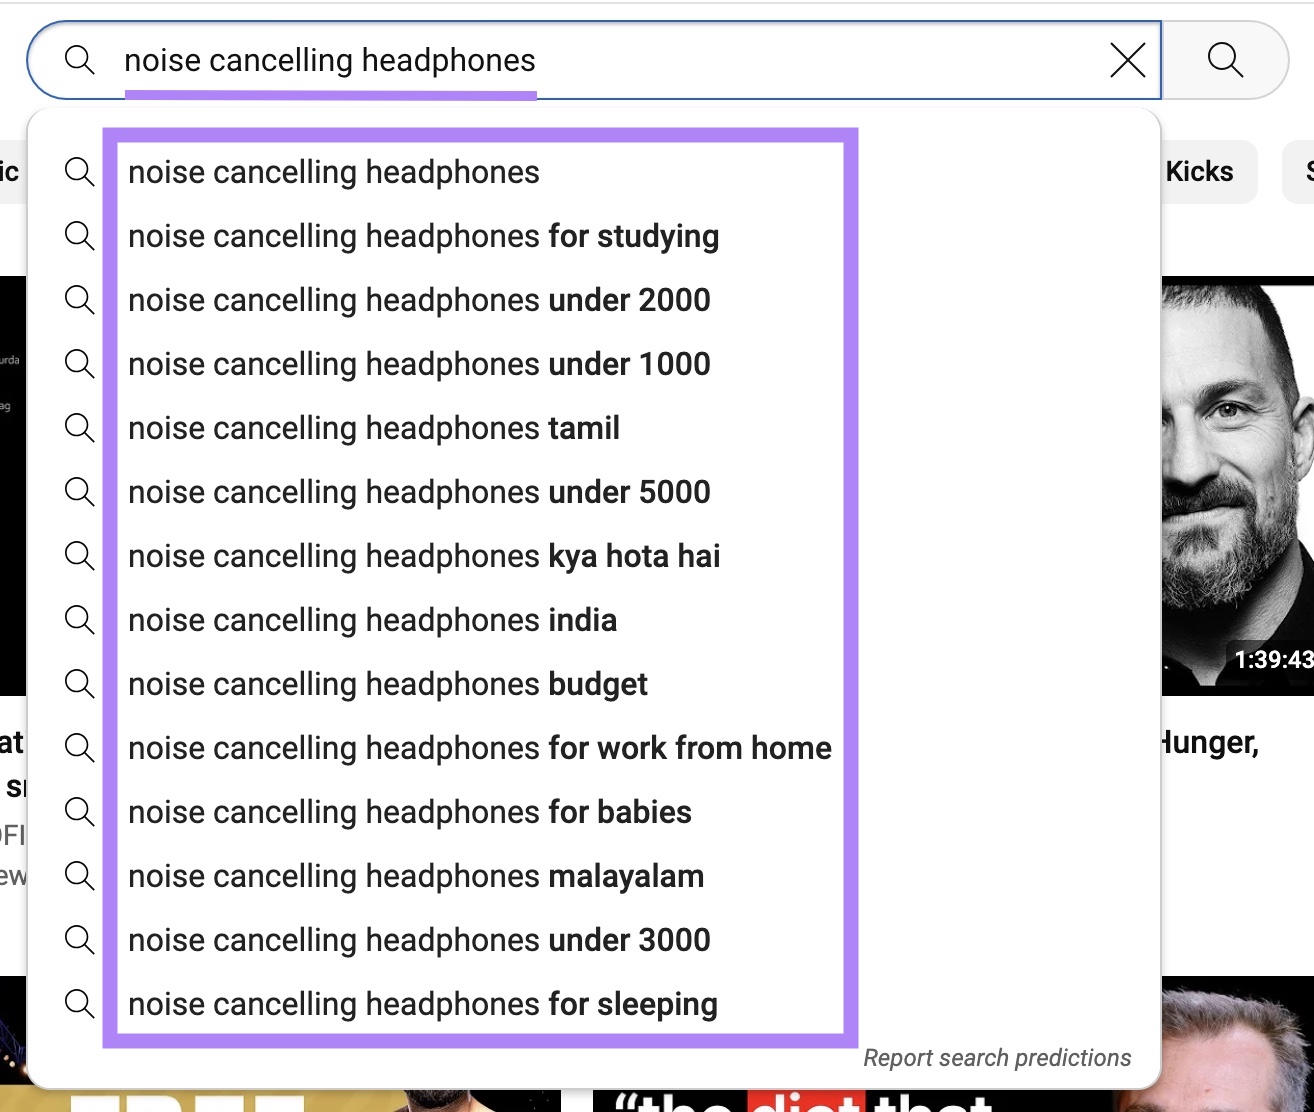 List of autocomplete suggestions for the search term 'noise cancelling headphones' on Youtube.